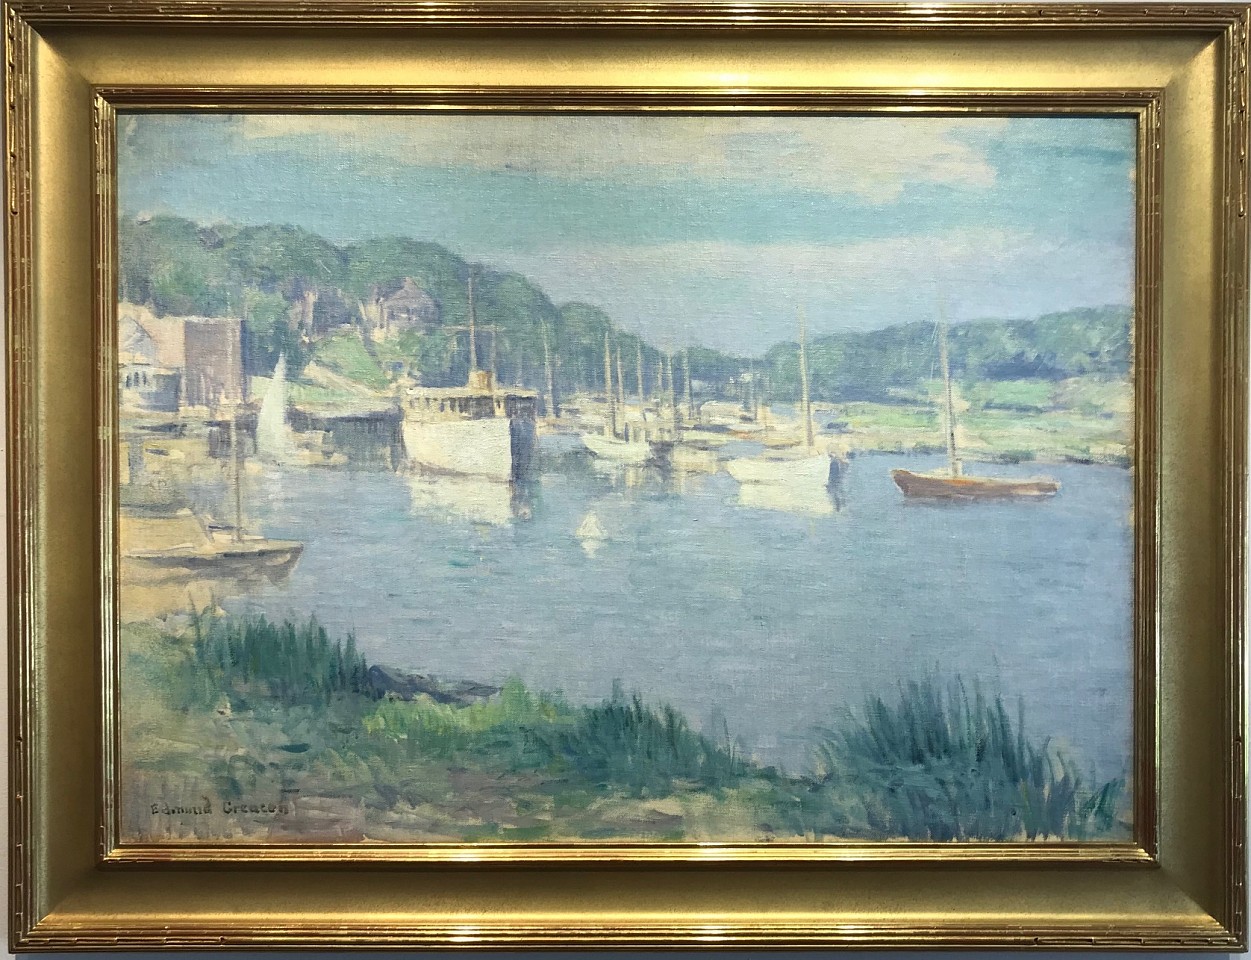 Edmund Greacen, Southport Harbor
oil on canvas, 24"" x 36""
JCAC 6304
Sold